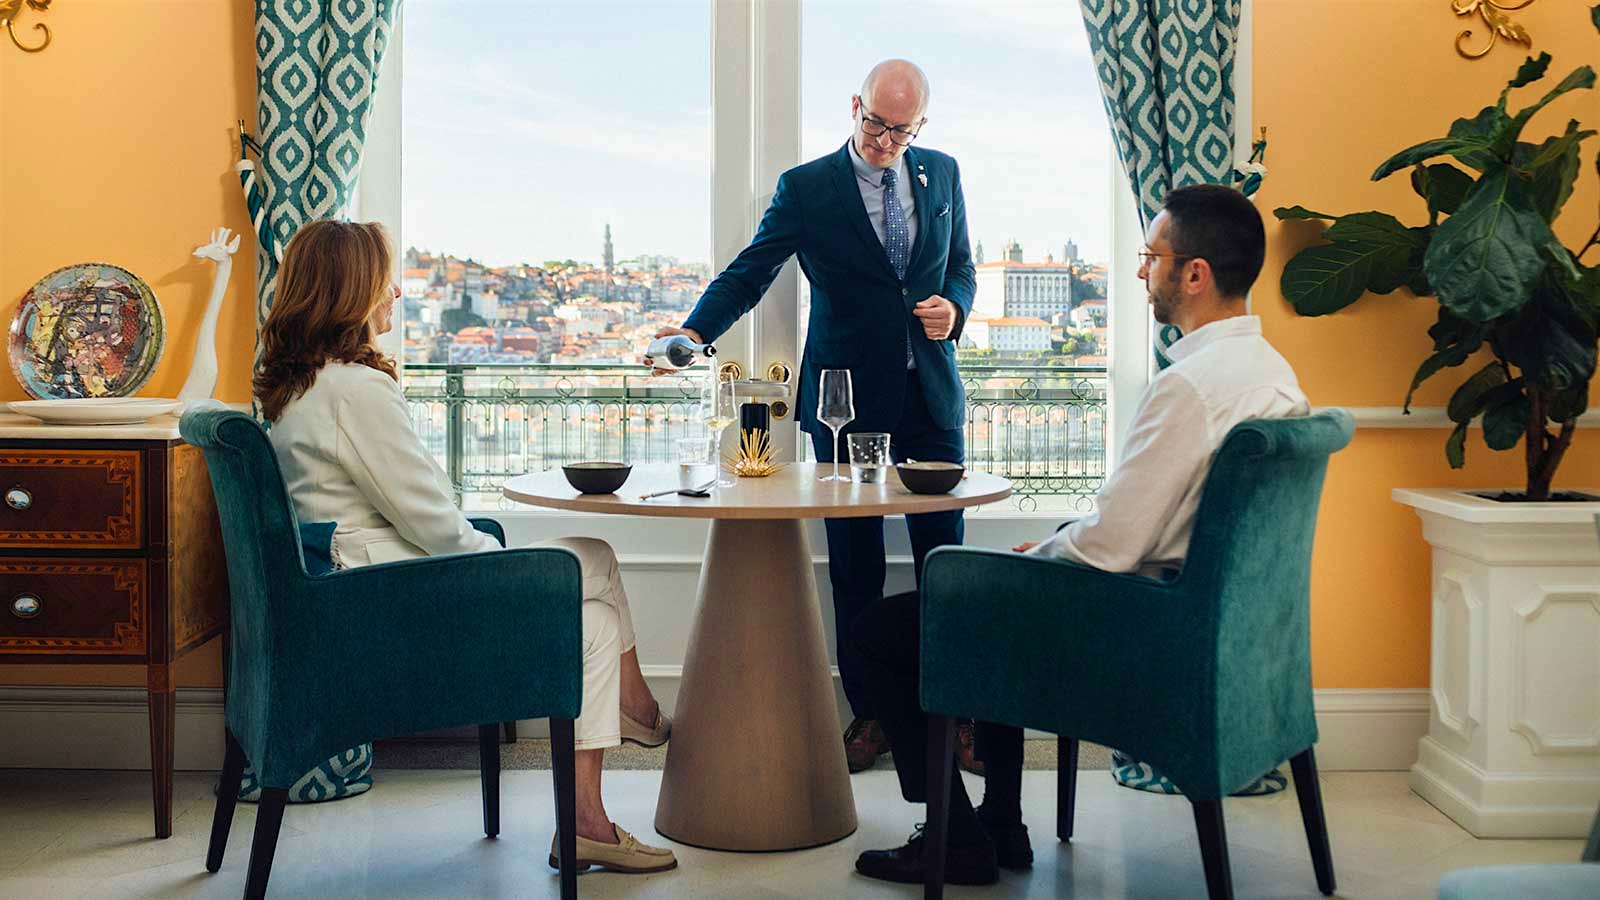  The Yeatman sommelier Paulo Padrão pouring wine for guests at a window-side table with a view of Vila Nova de Gaia and the Douro River